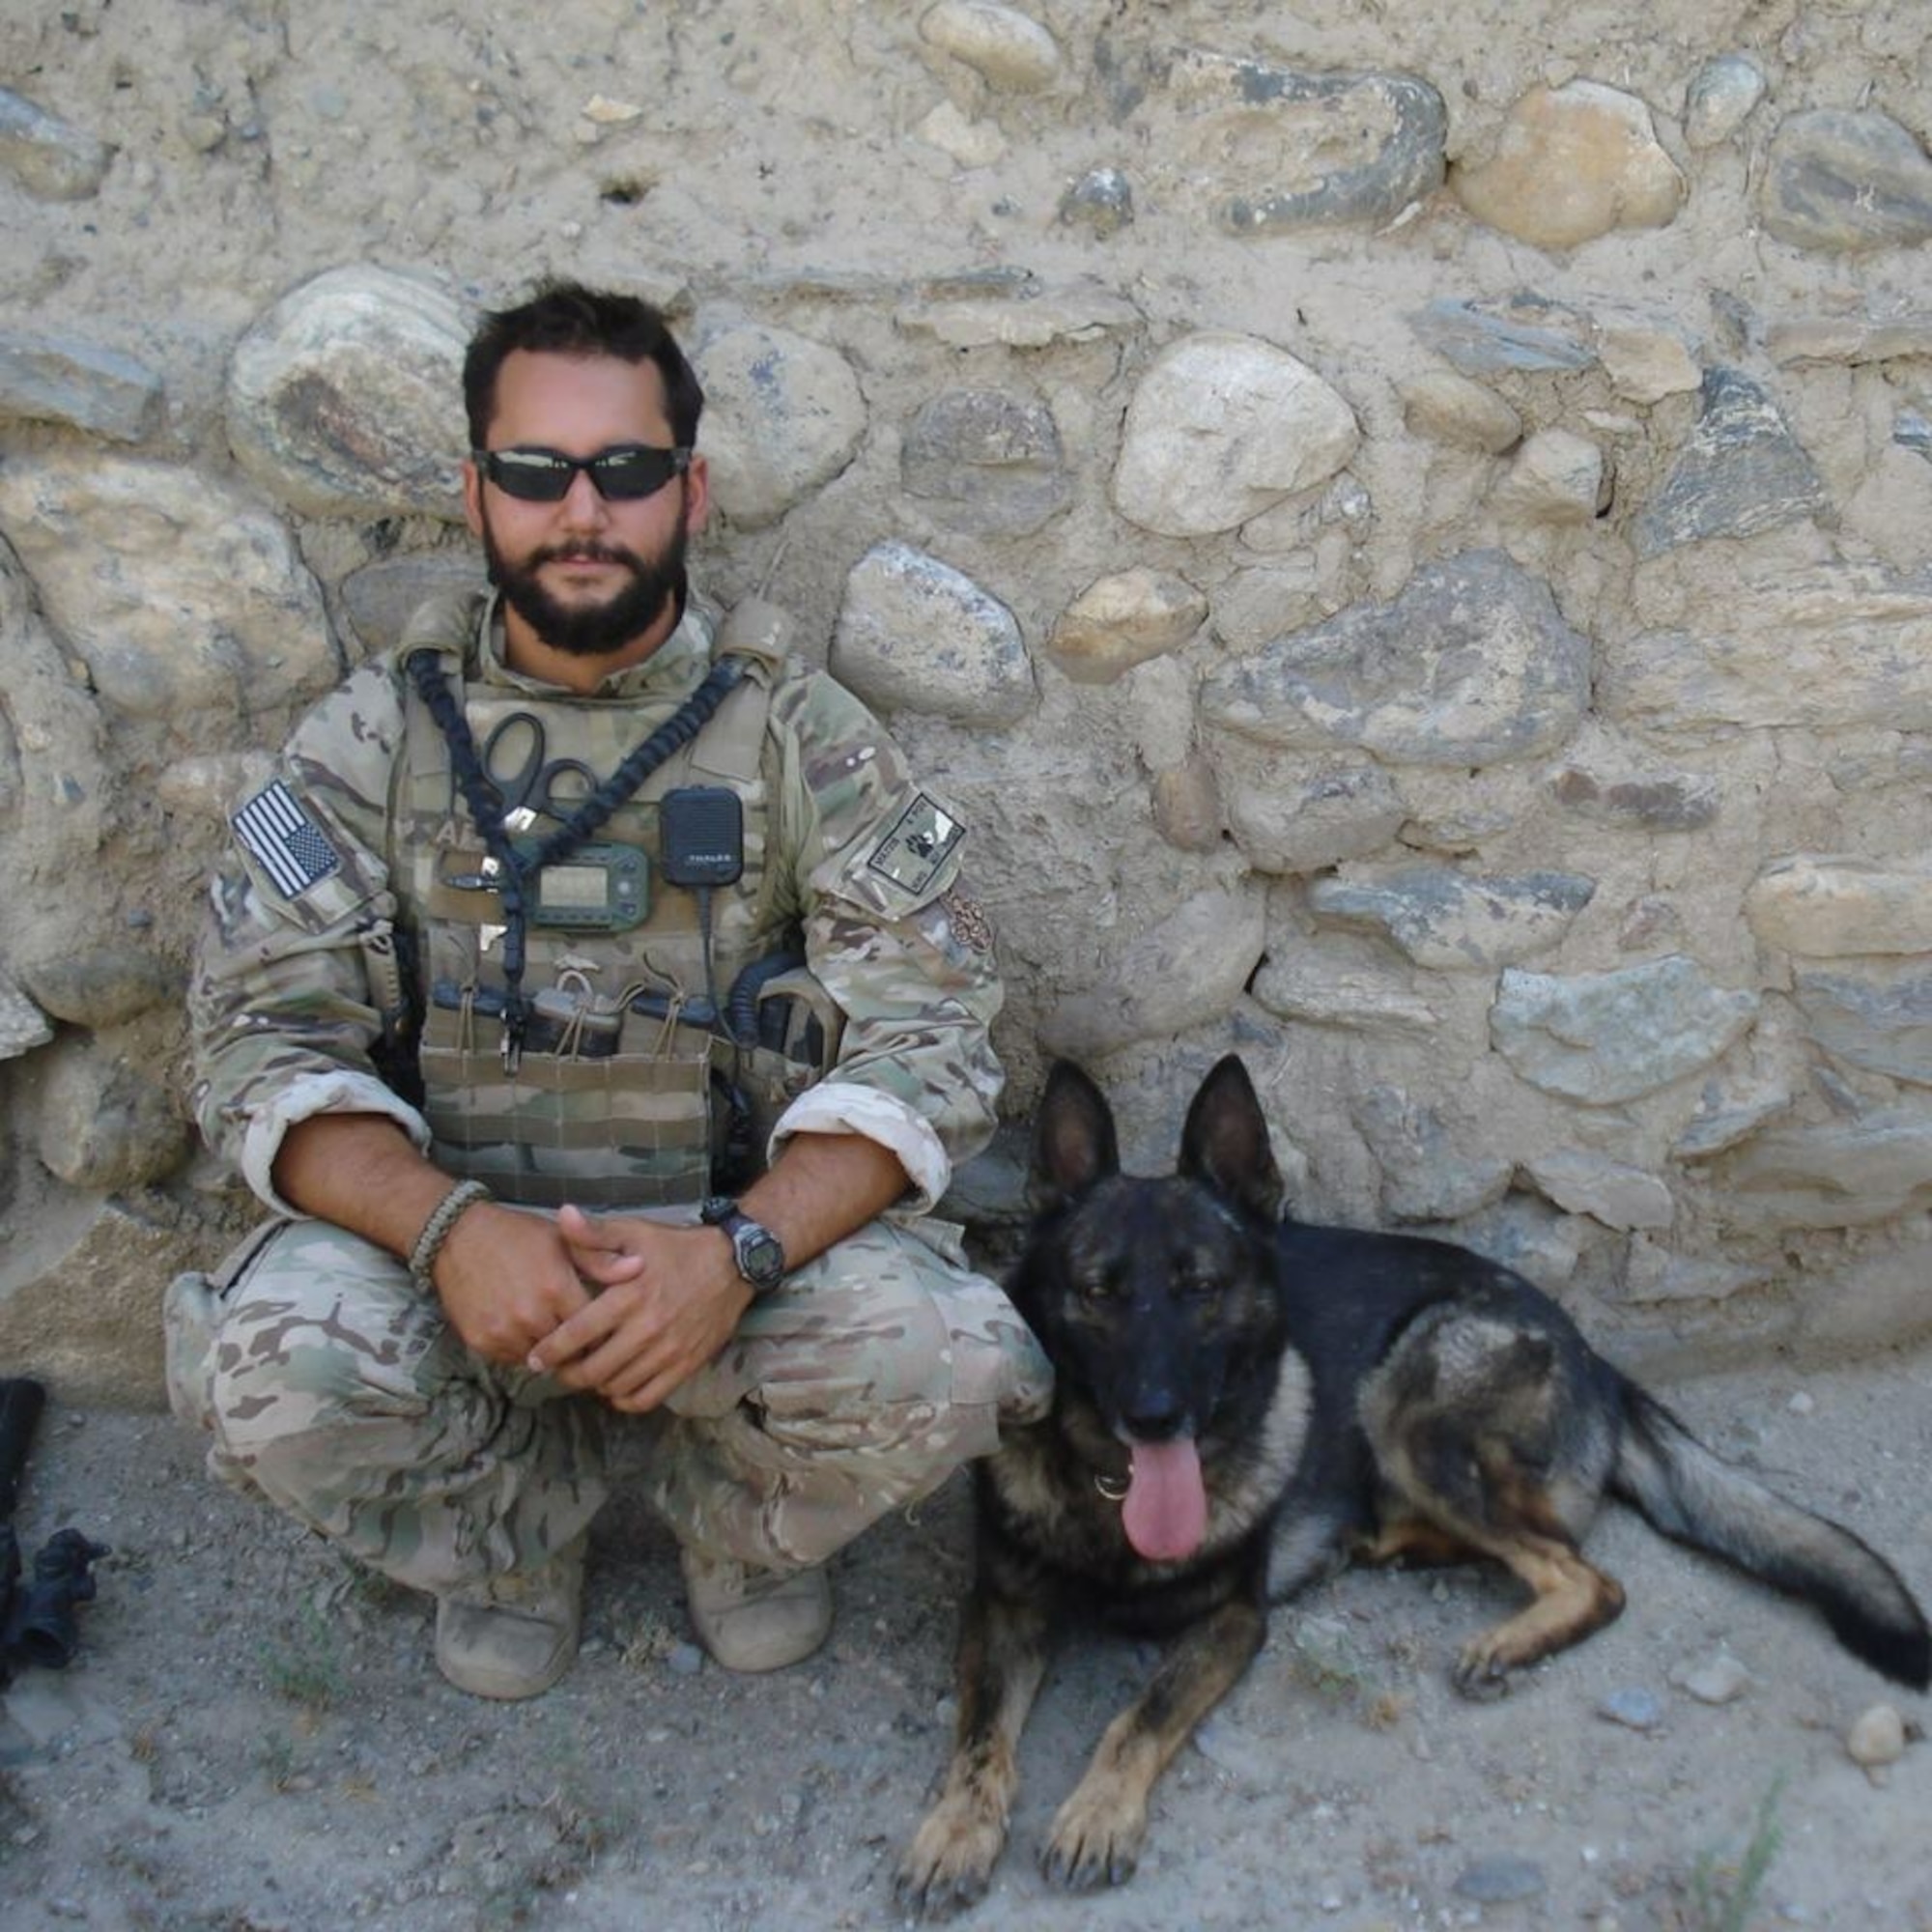 U.S. Air Force Staff Sgt. David Macdonald, dog handler, poses for a photo with military working dog Ali at Bagram Air Base, Afghanistan, in 2013. (Courtesy photo)